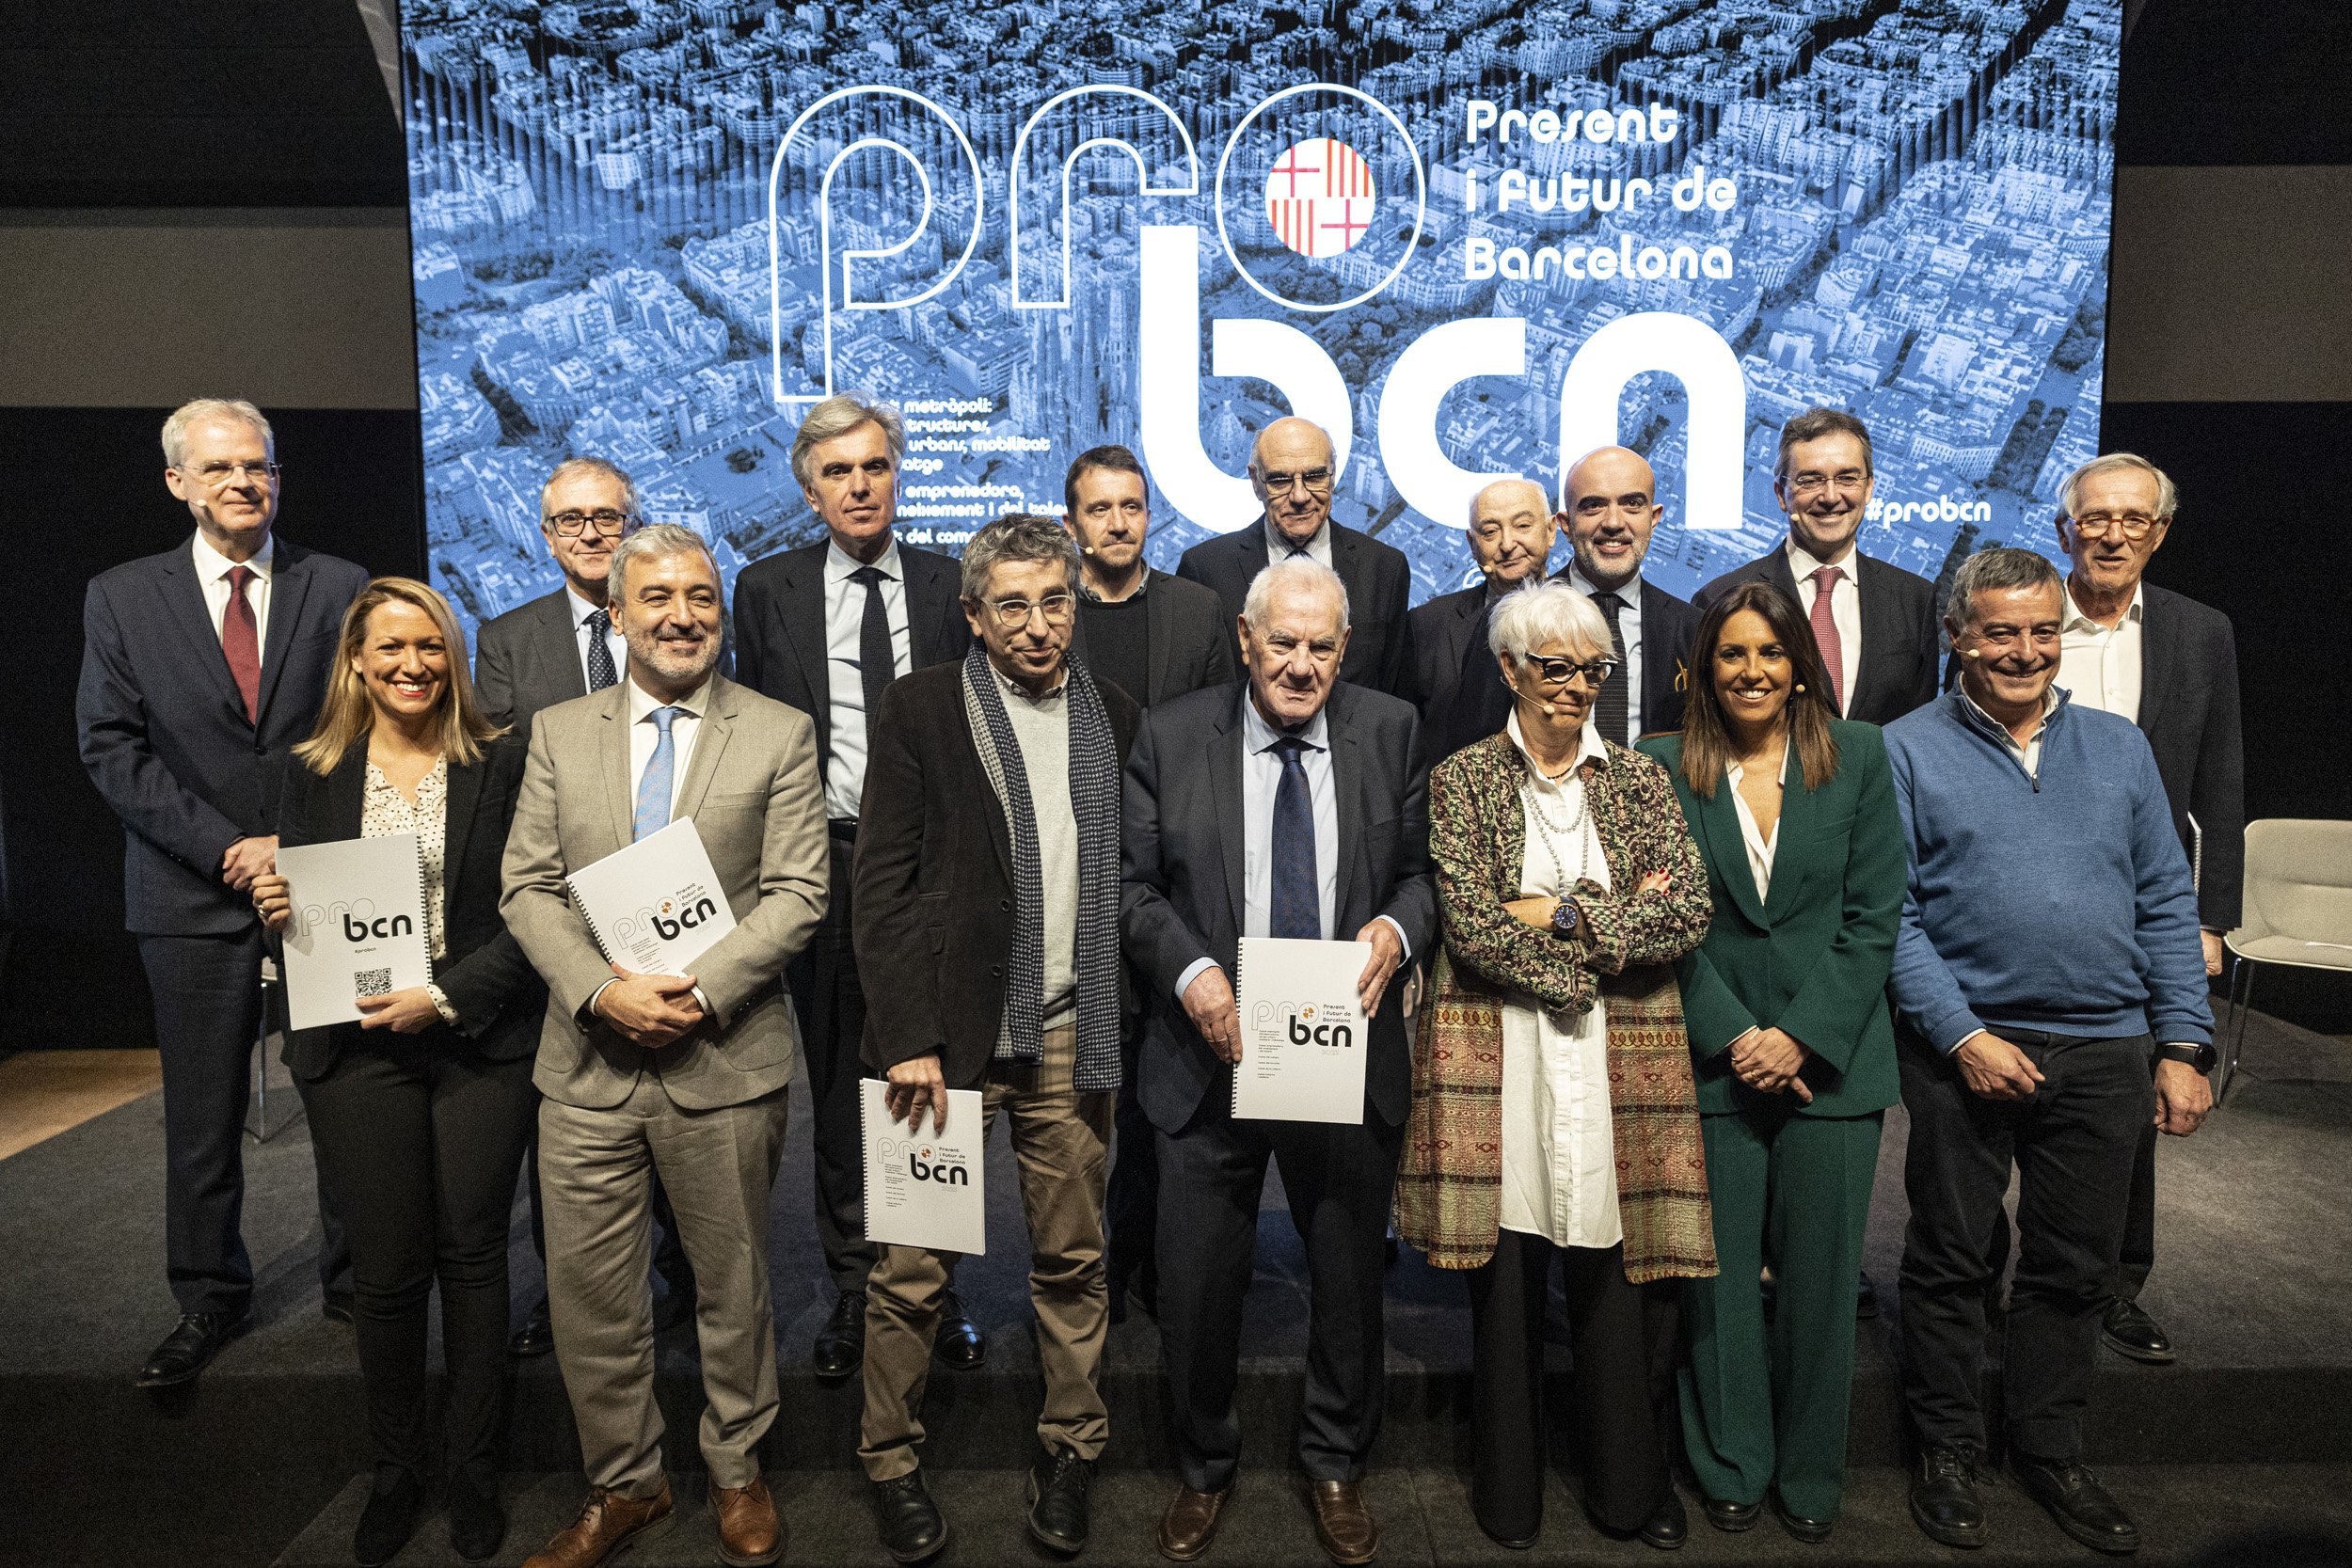 A hundred Barcelona groups give mayoral candidates infrastructure and housing demands